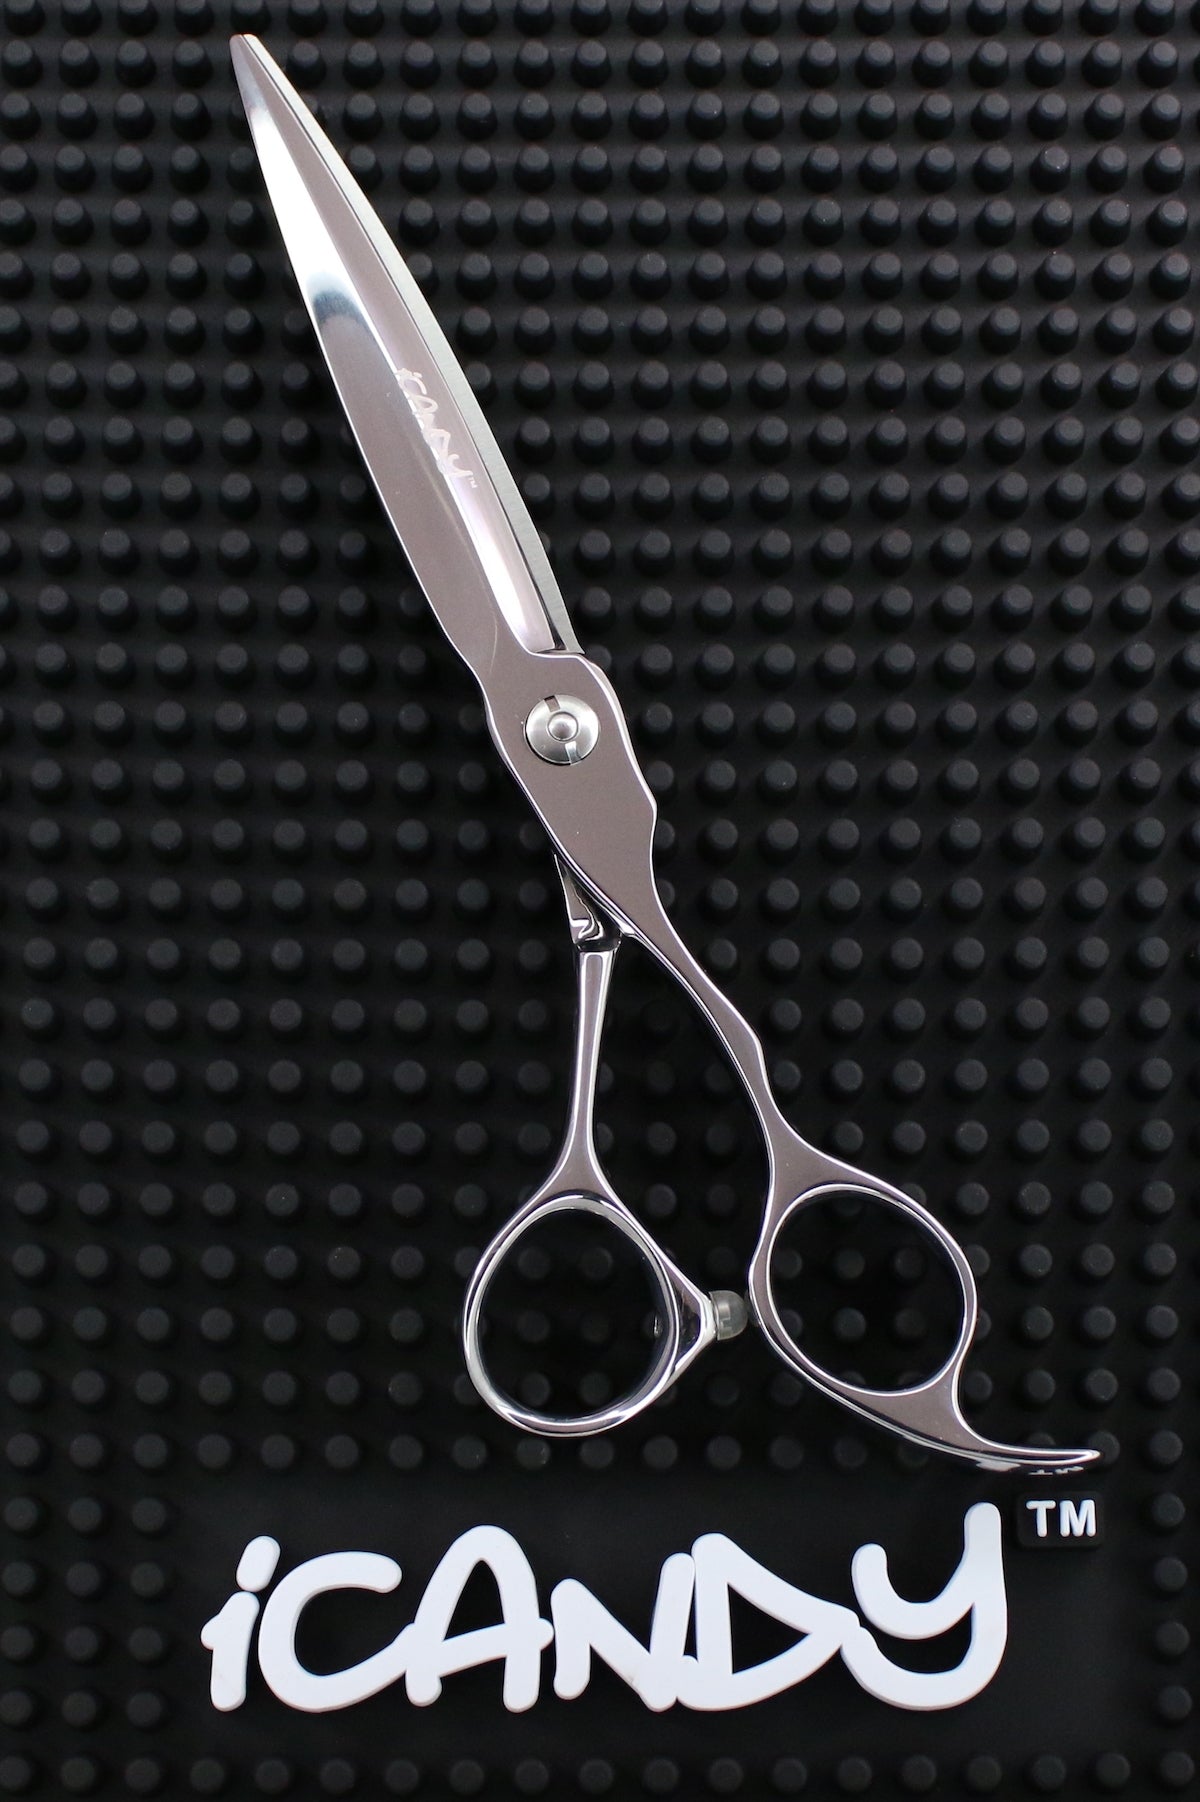 iCandy SLIDER VG10 Scissors (7.0 inch) Limited Edition! - iCandy Scissors